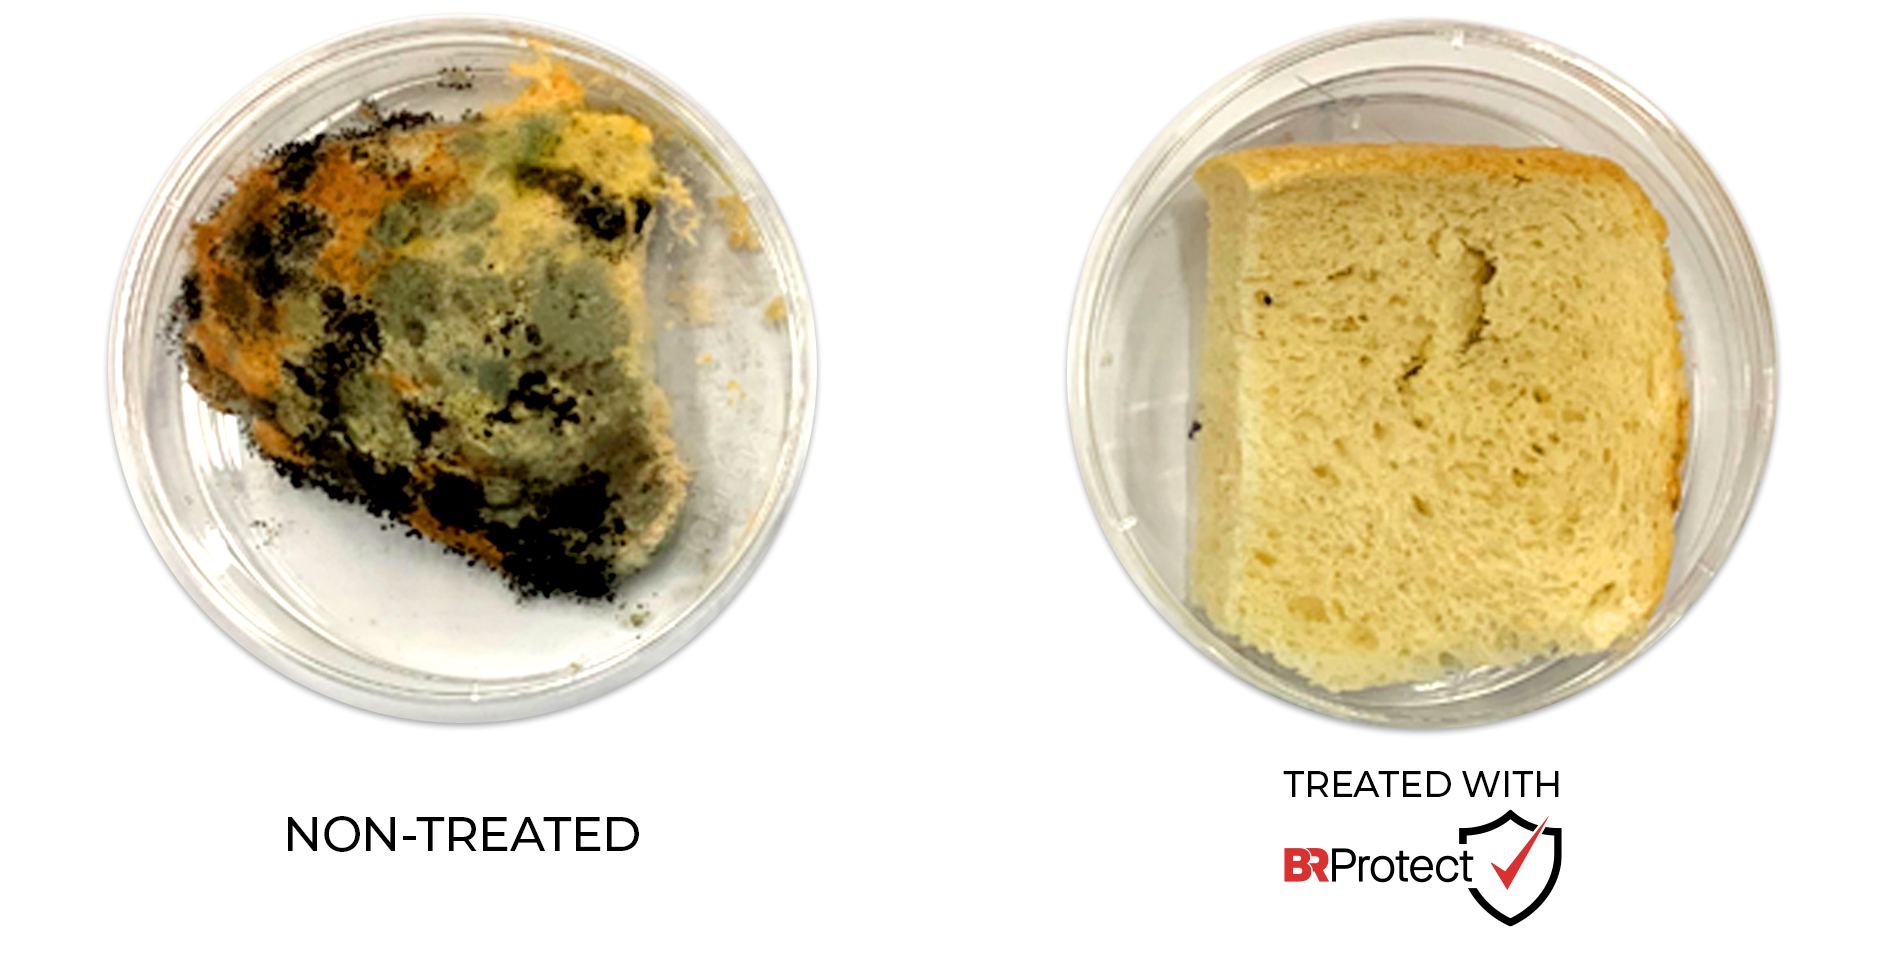 Bread Not treated vs bread treated with br protect